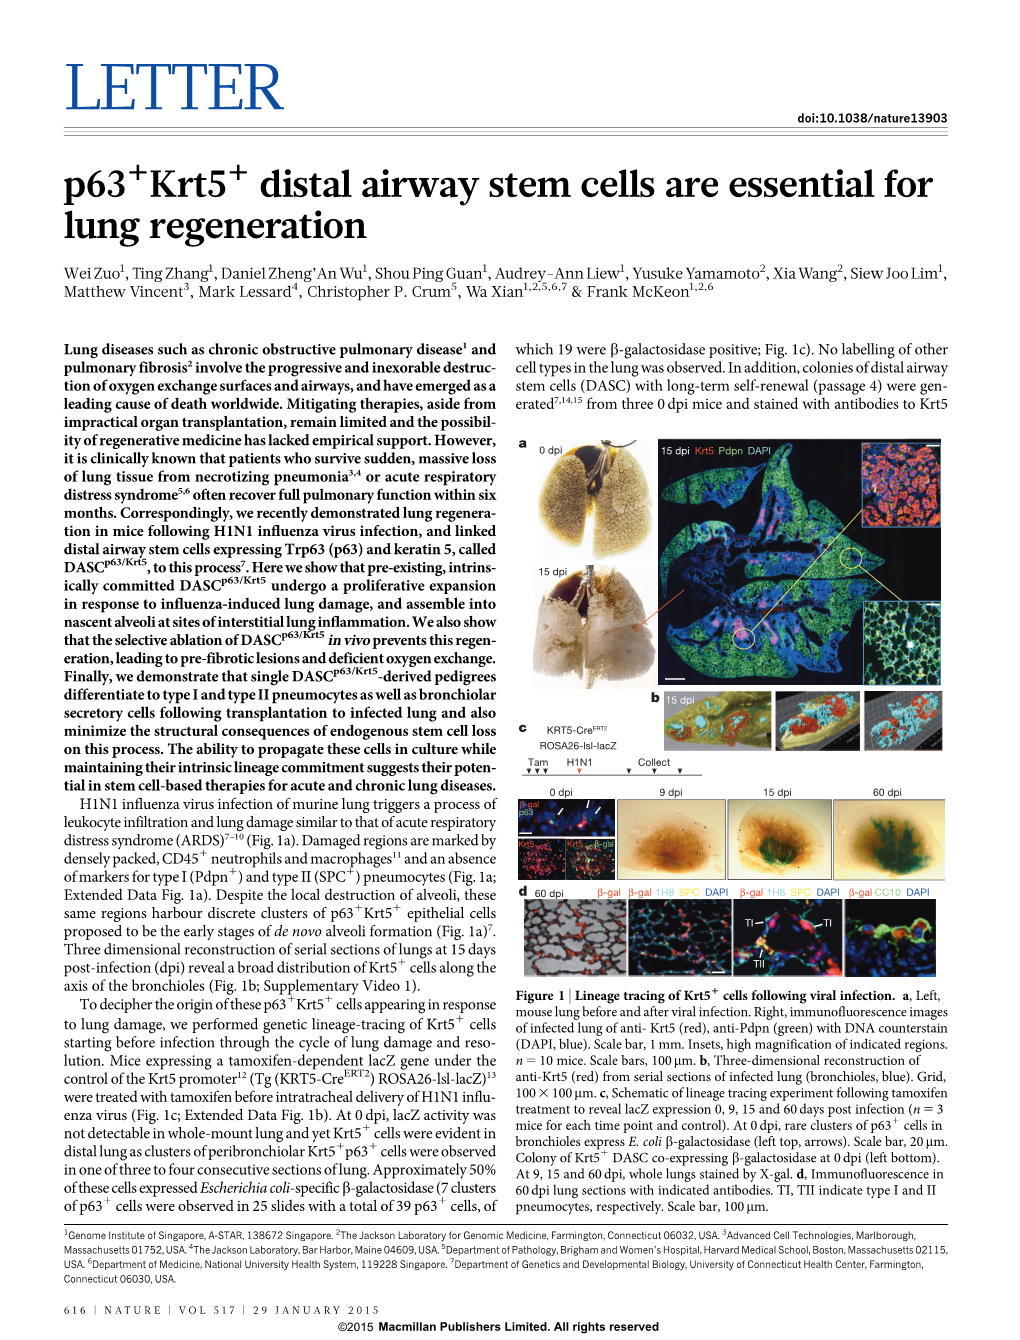 P63+Krt5+ Distal Airway Stem Cells Are Essential for Lung Regeneration